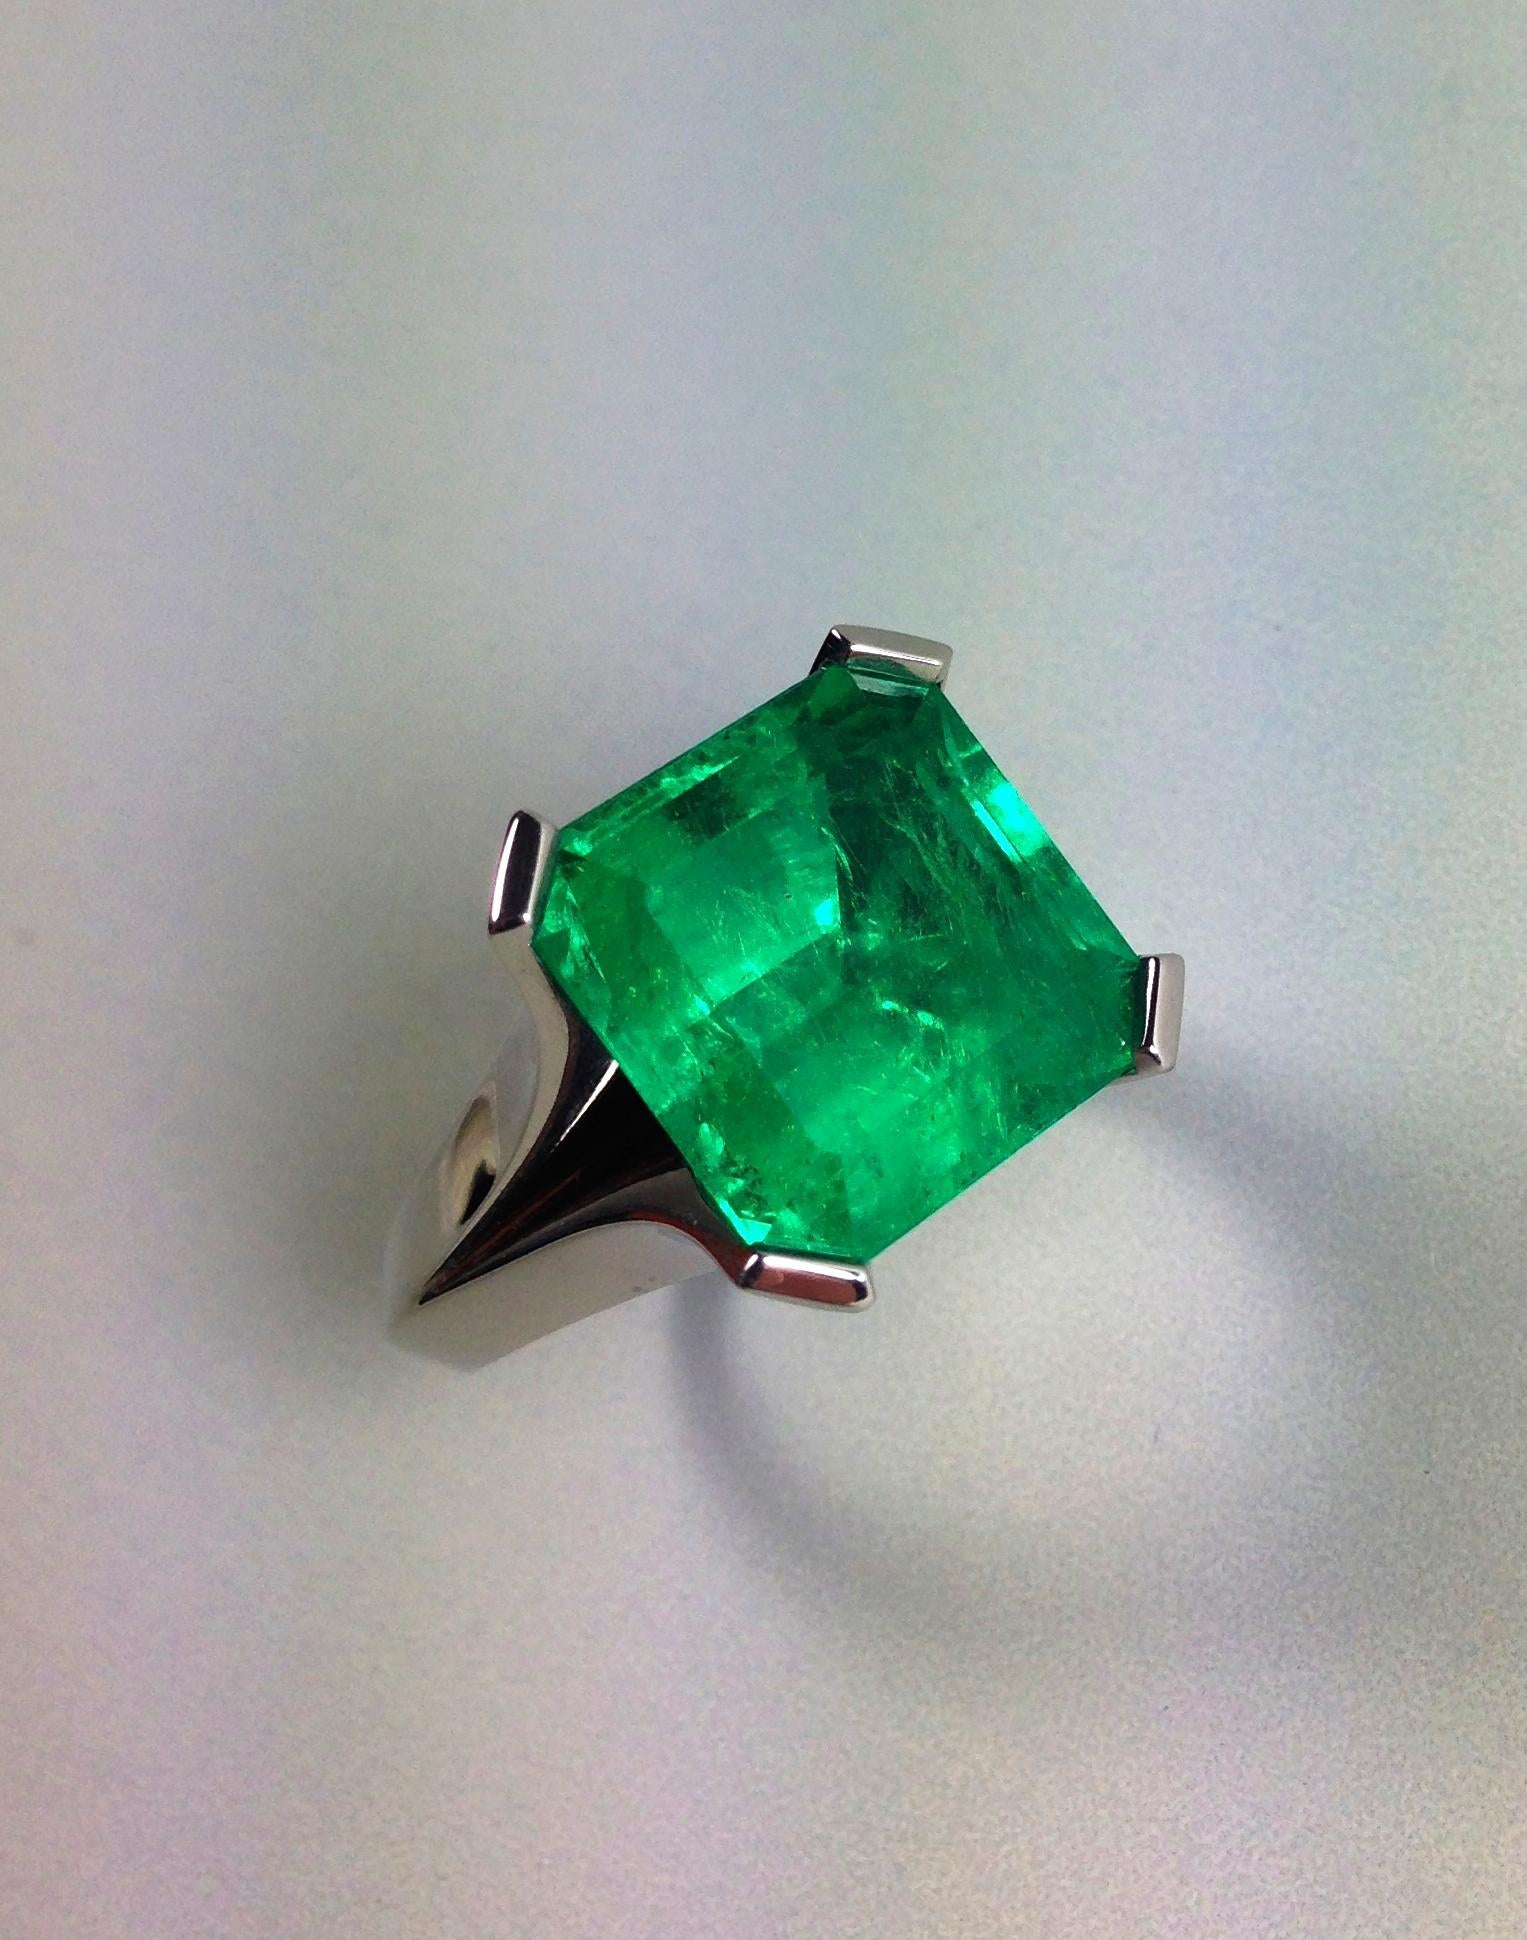 EVERY0NE'S DARLING is my name. Stylish Colombian emerald solitaire cocktail ring, designed based on a Cartier study of the 1930 years, handcrafted in solid 18 karat white gold with fluid like prongs by Trusted Green. Showcasing a top class quality